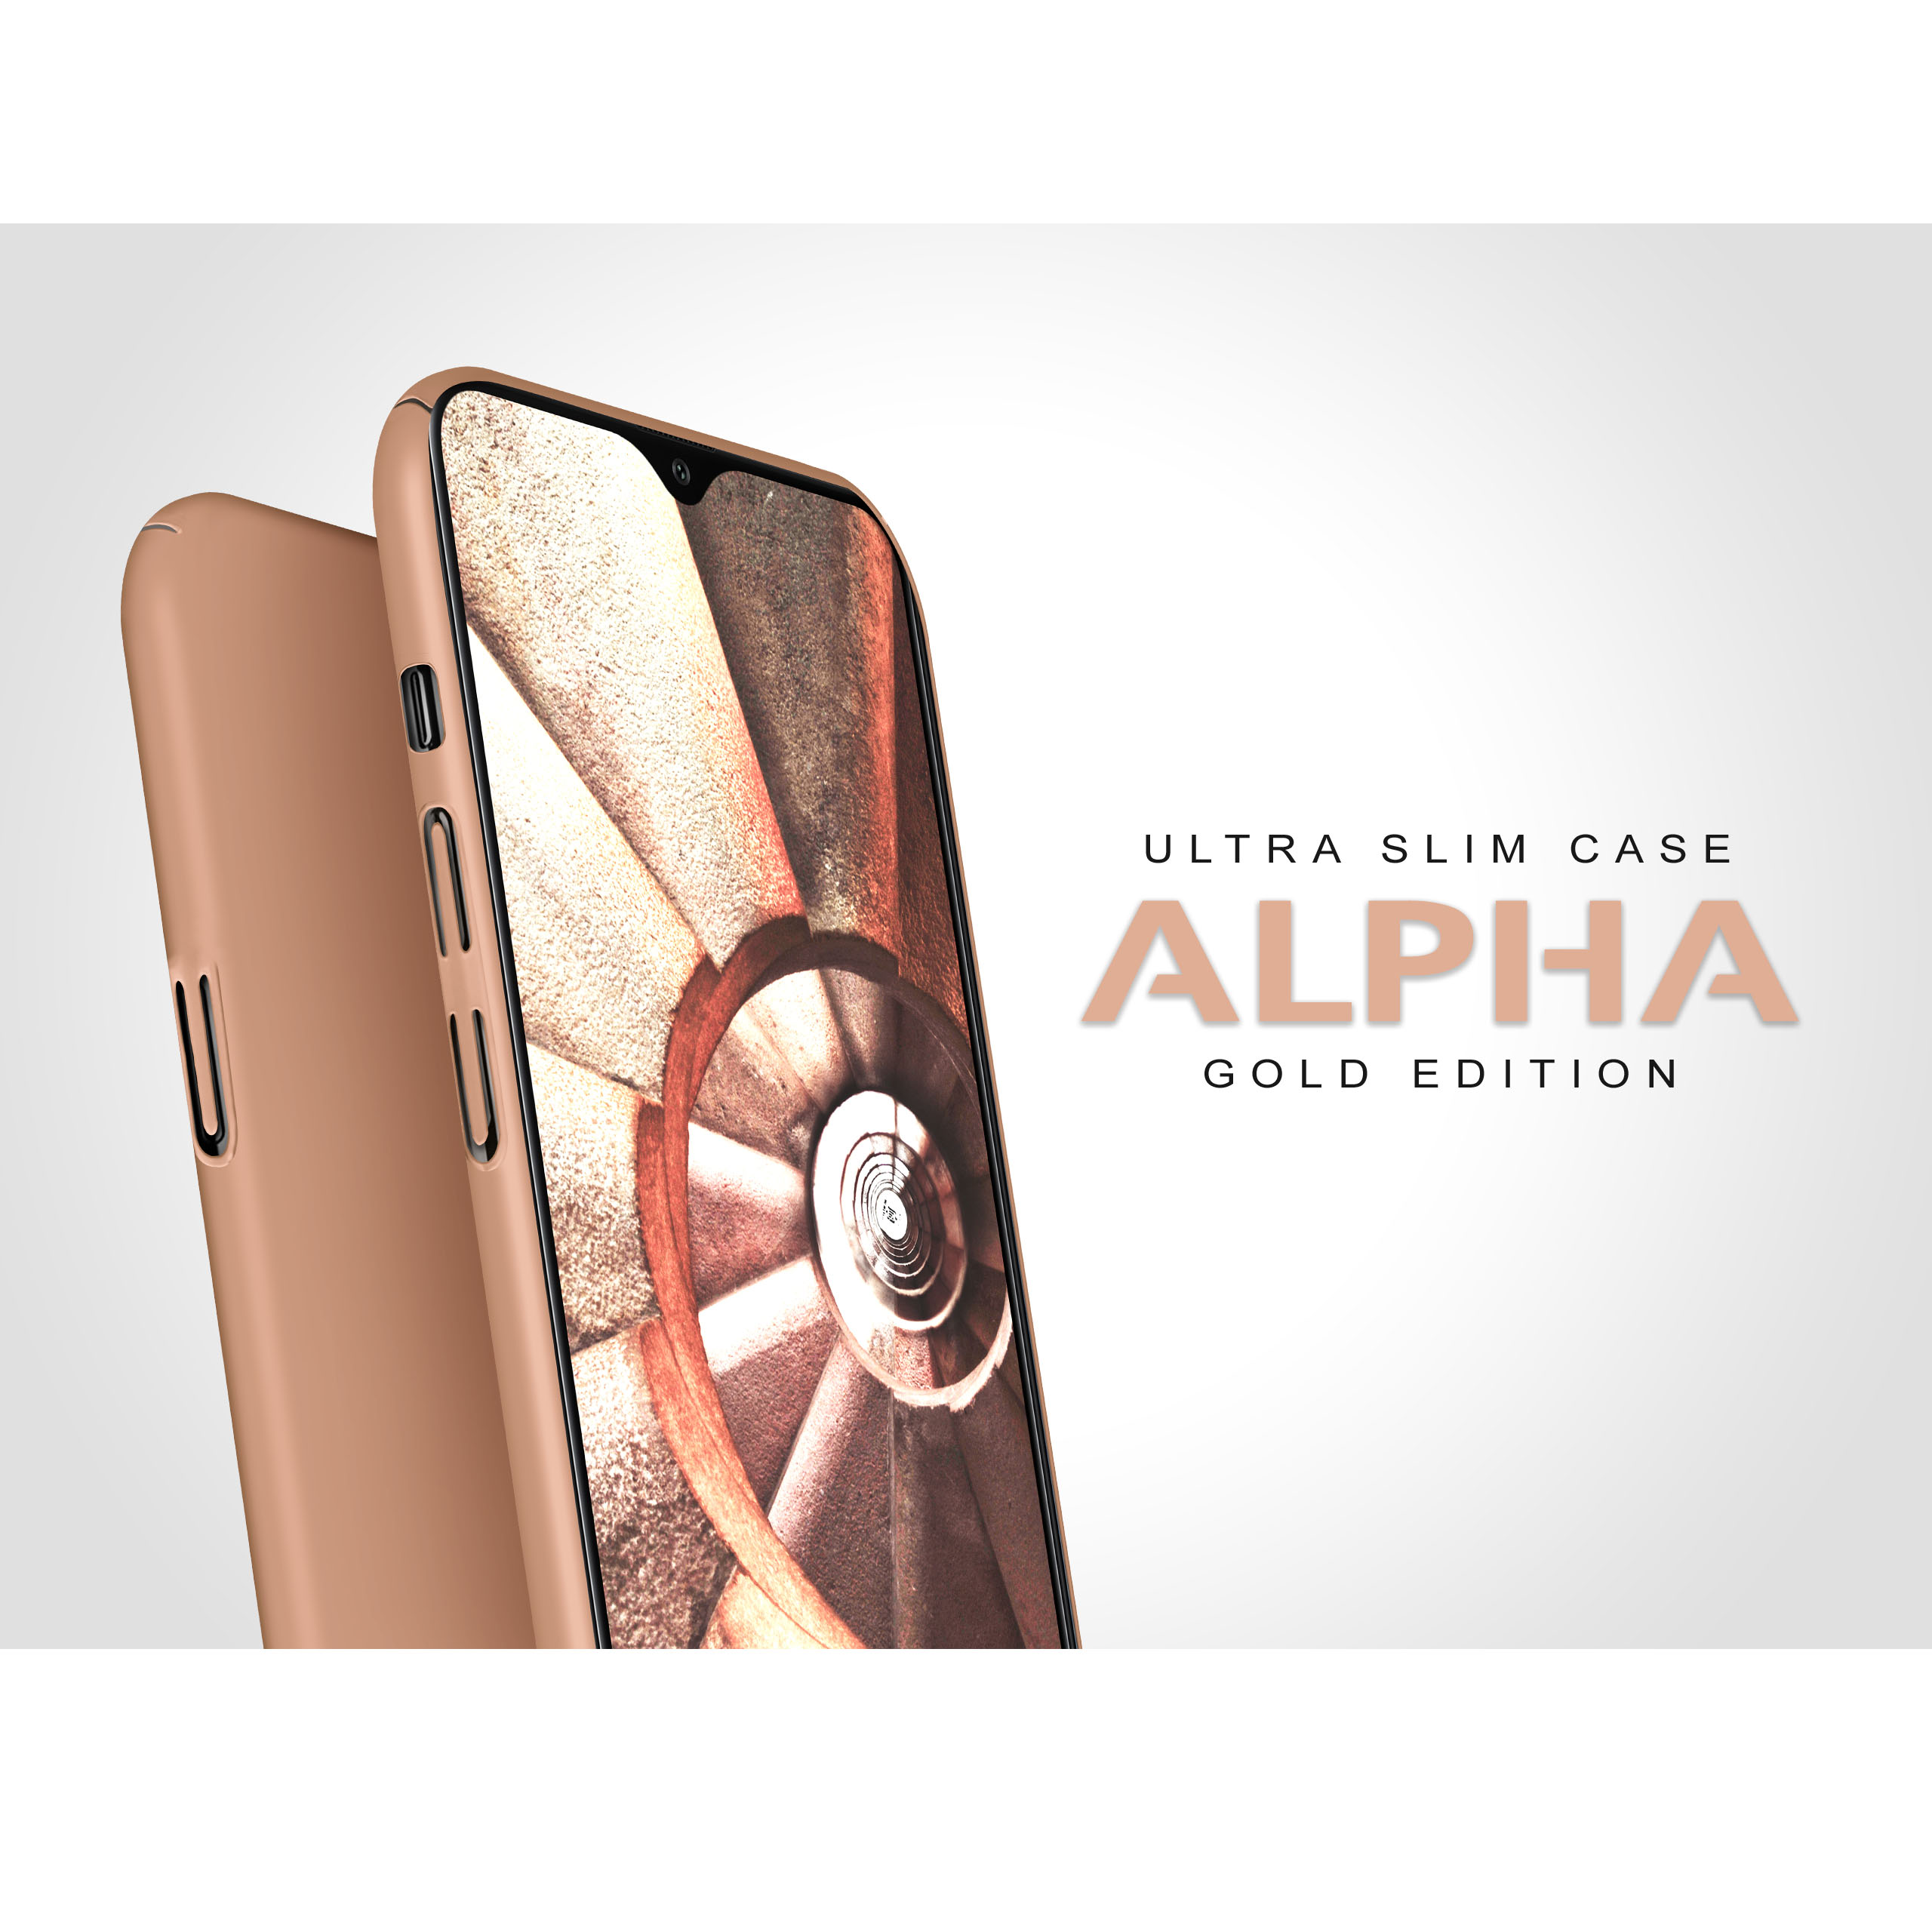 MOEX Alpha Case, Backcover, 7/ / Note Gold Redmi 7S, Note Pro Xiaomi, 7